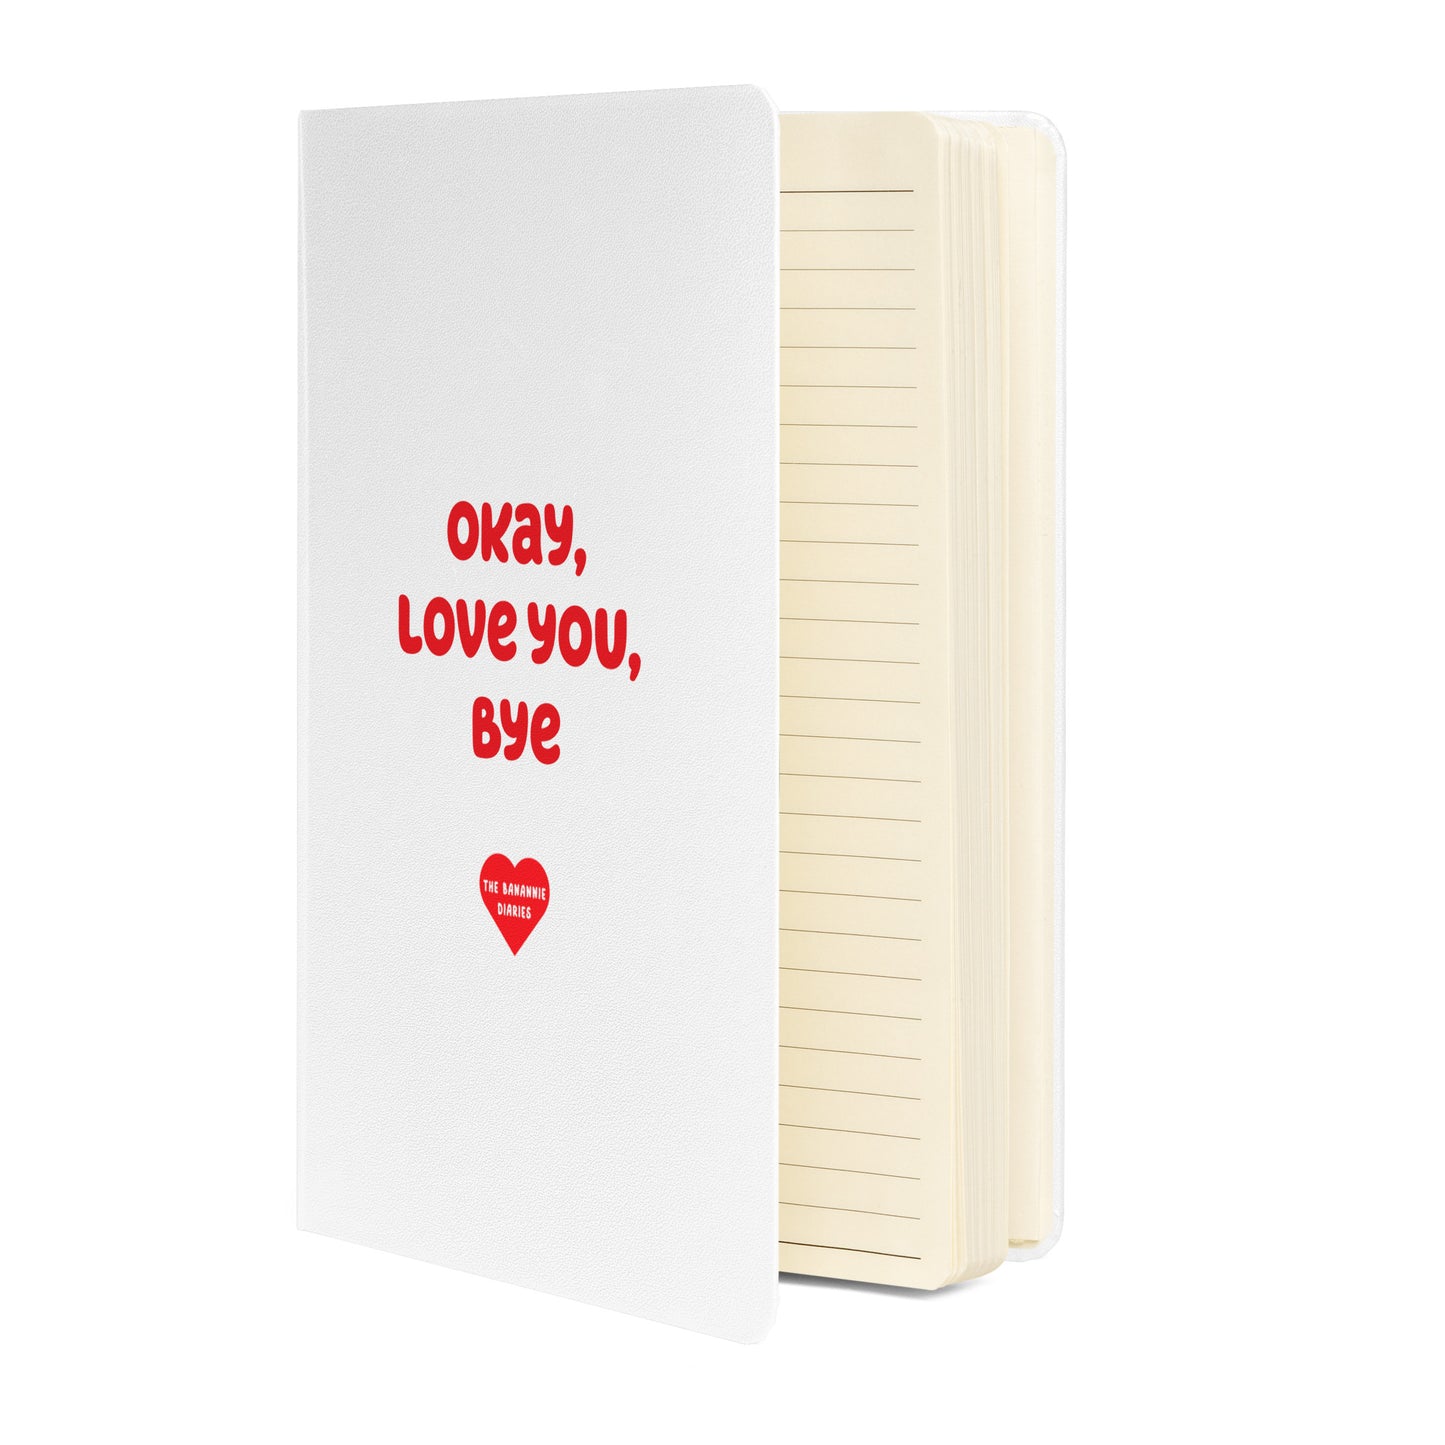 Okay, Love You, Bye - Hardcover Bound Notebook, 80 Pages, By The Banannie Diaries